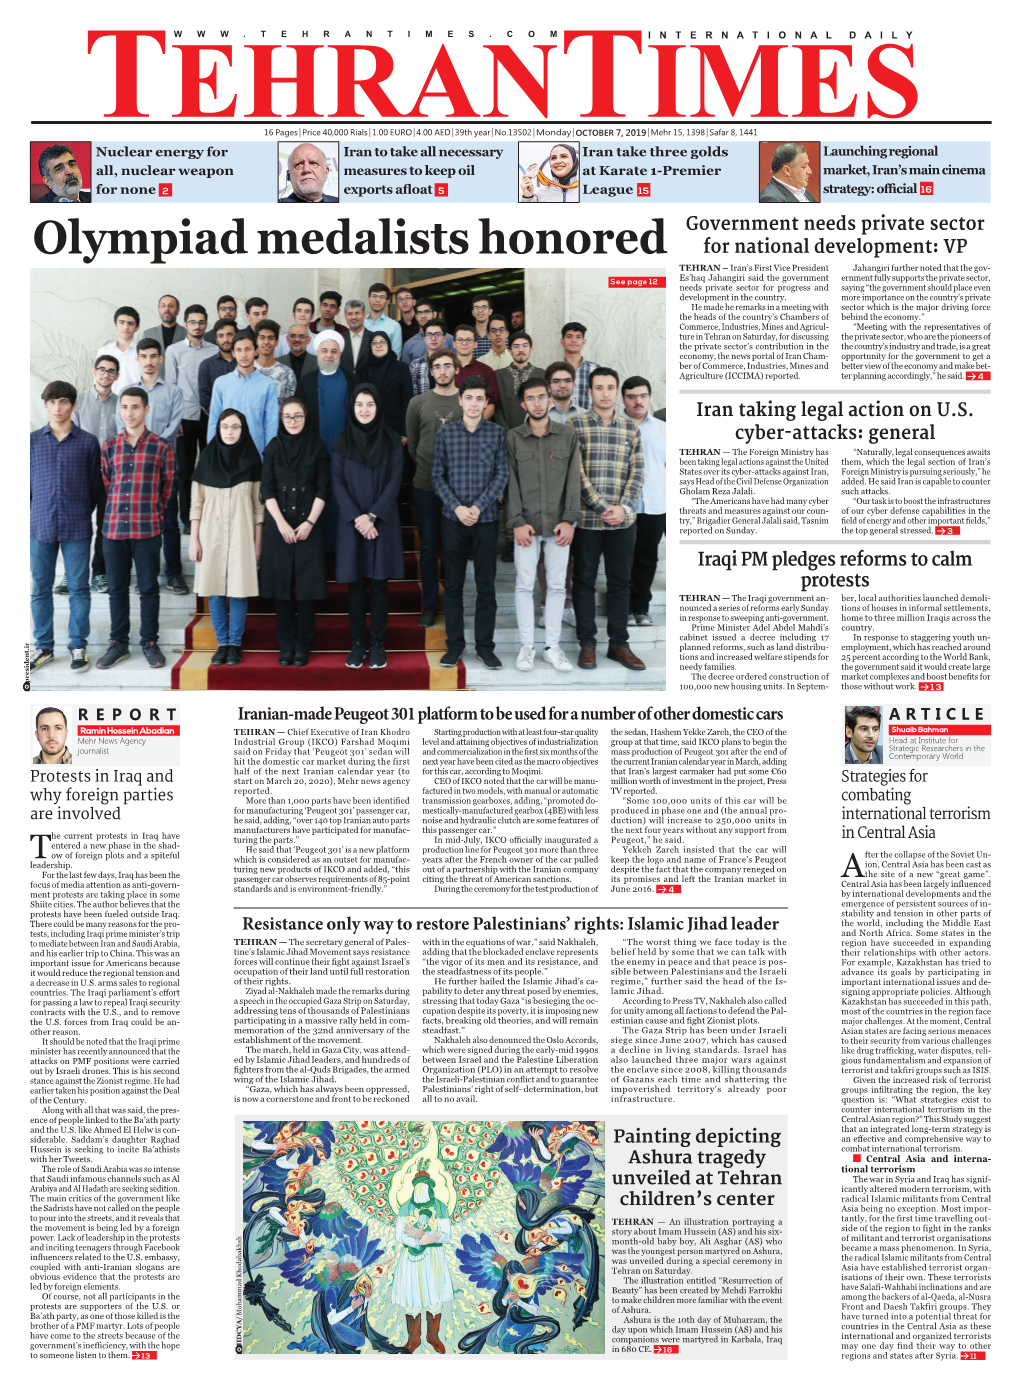 Olympiad Medalists Honored